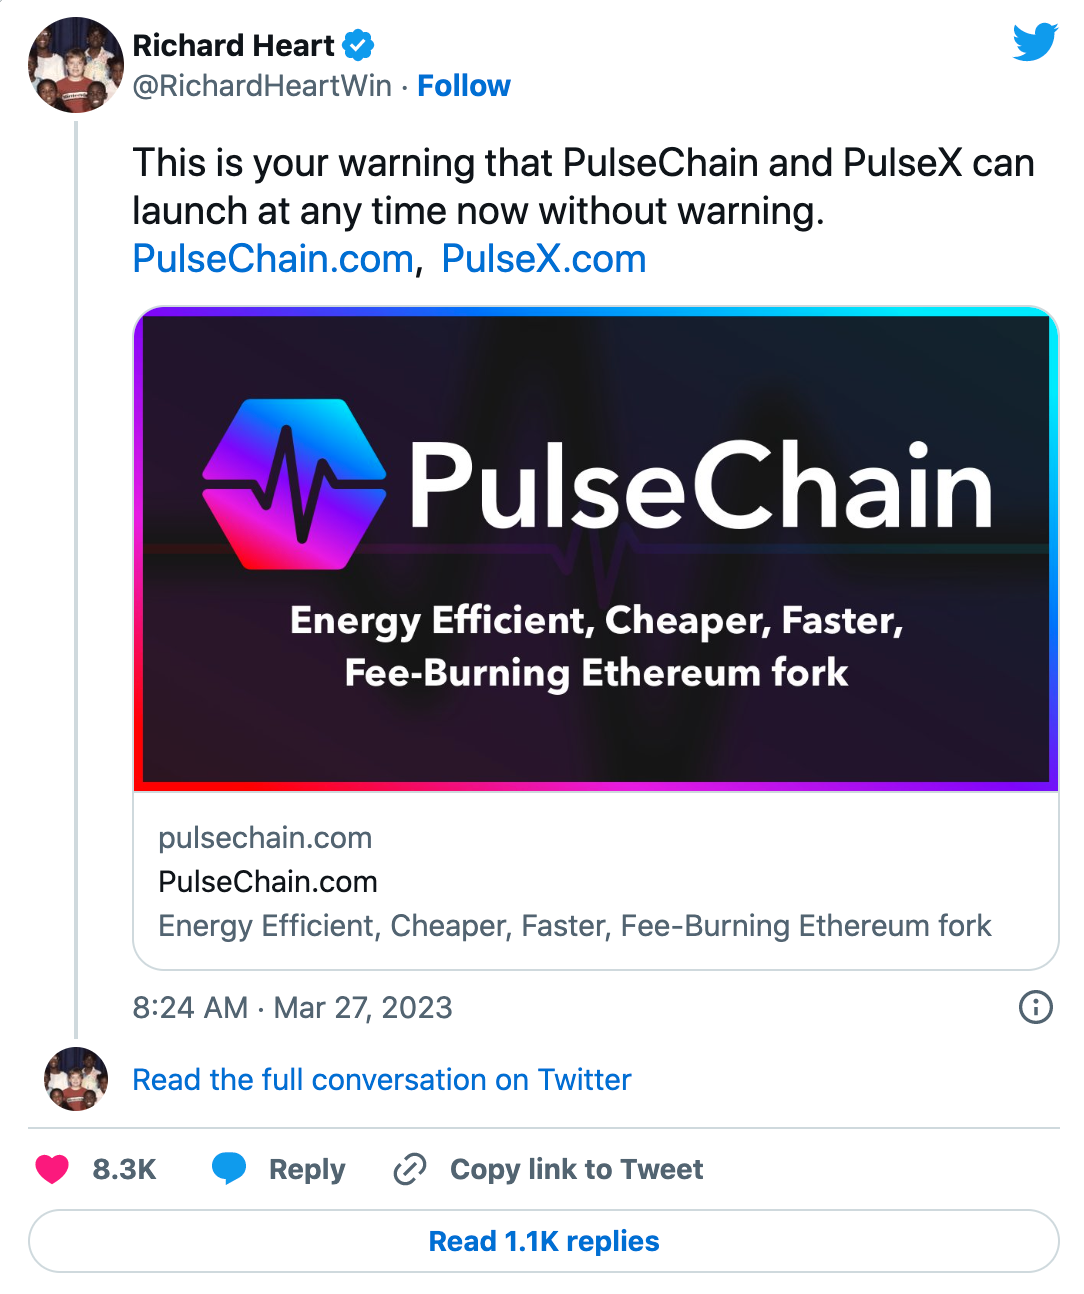 Tweet from Richard Heart saying PulseChain could launch any time now without warning.